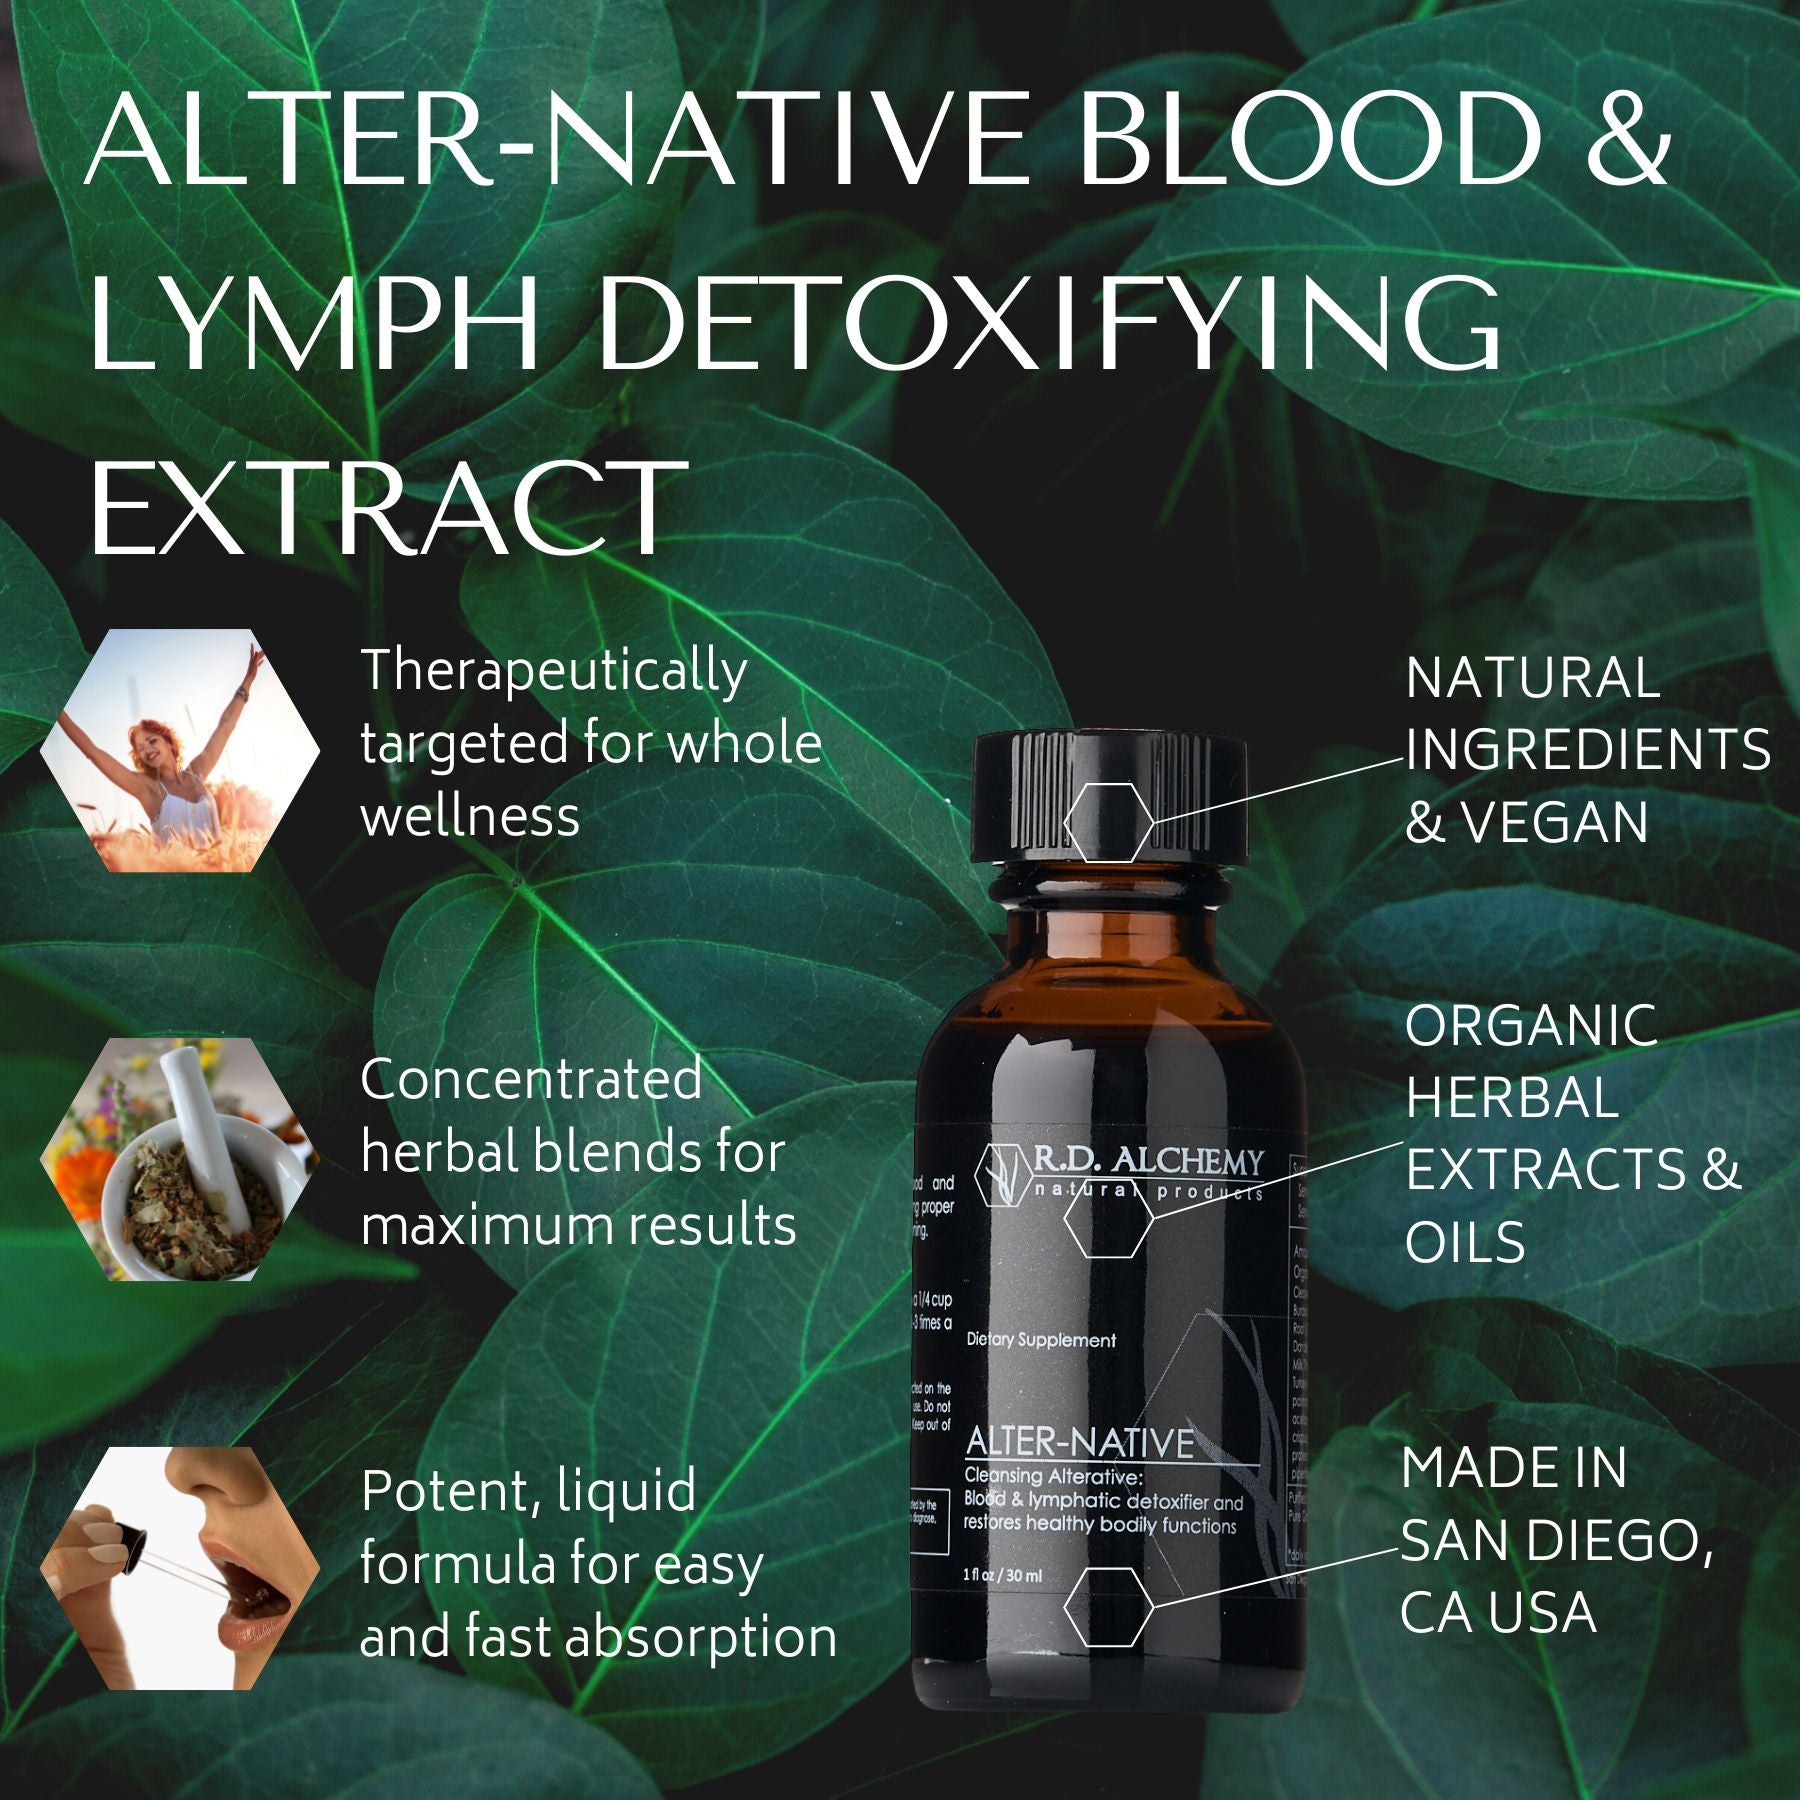 Alter-Native Blood & Lymph Detoxifying Extract